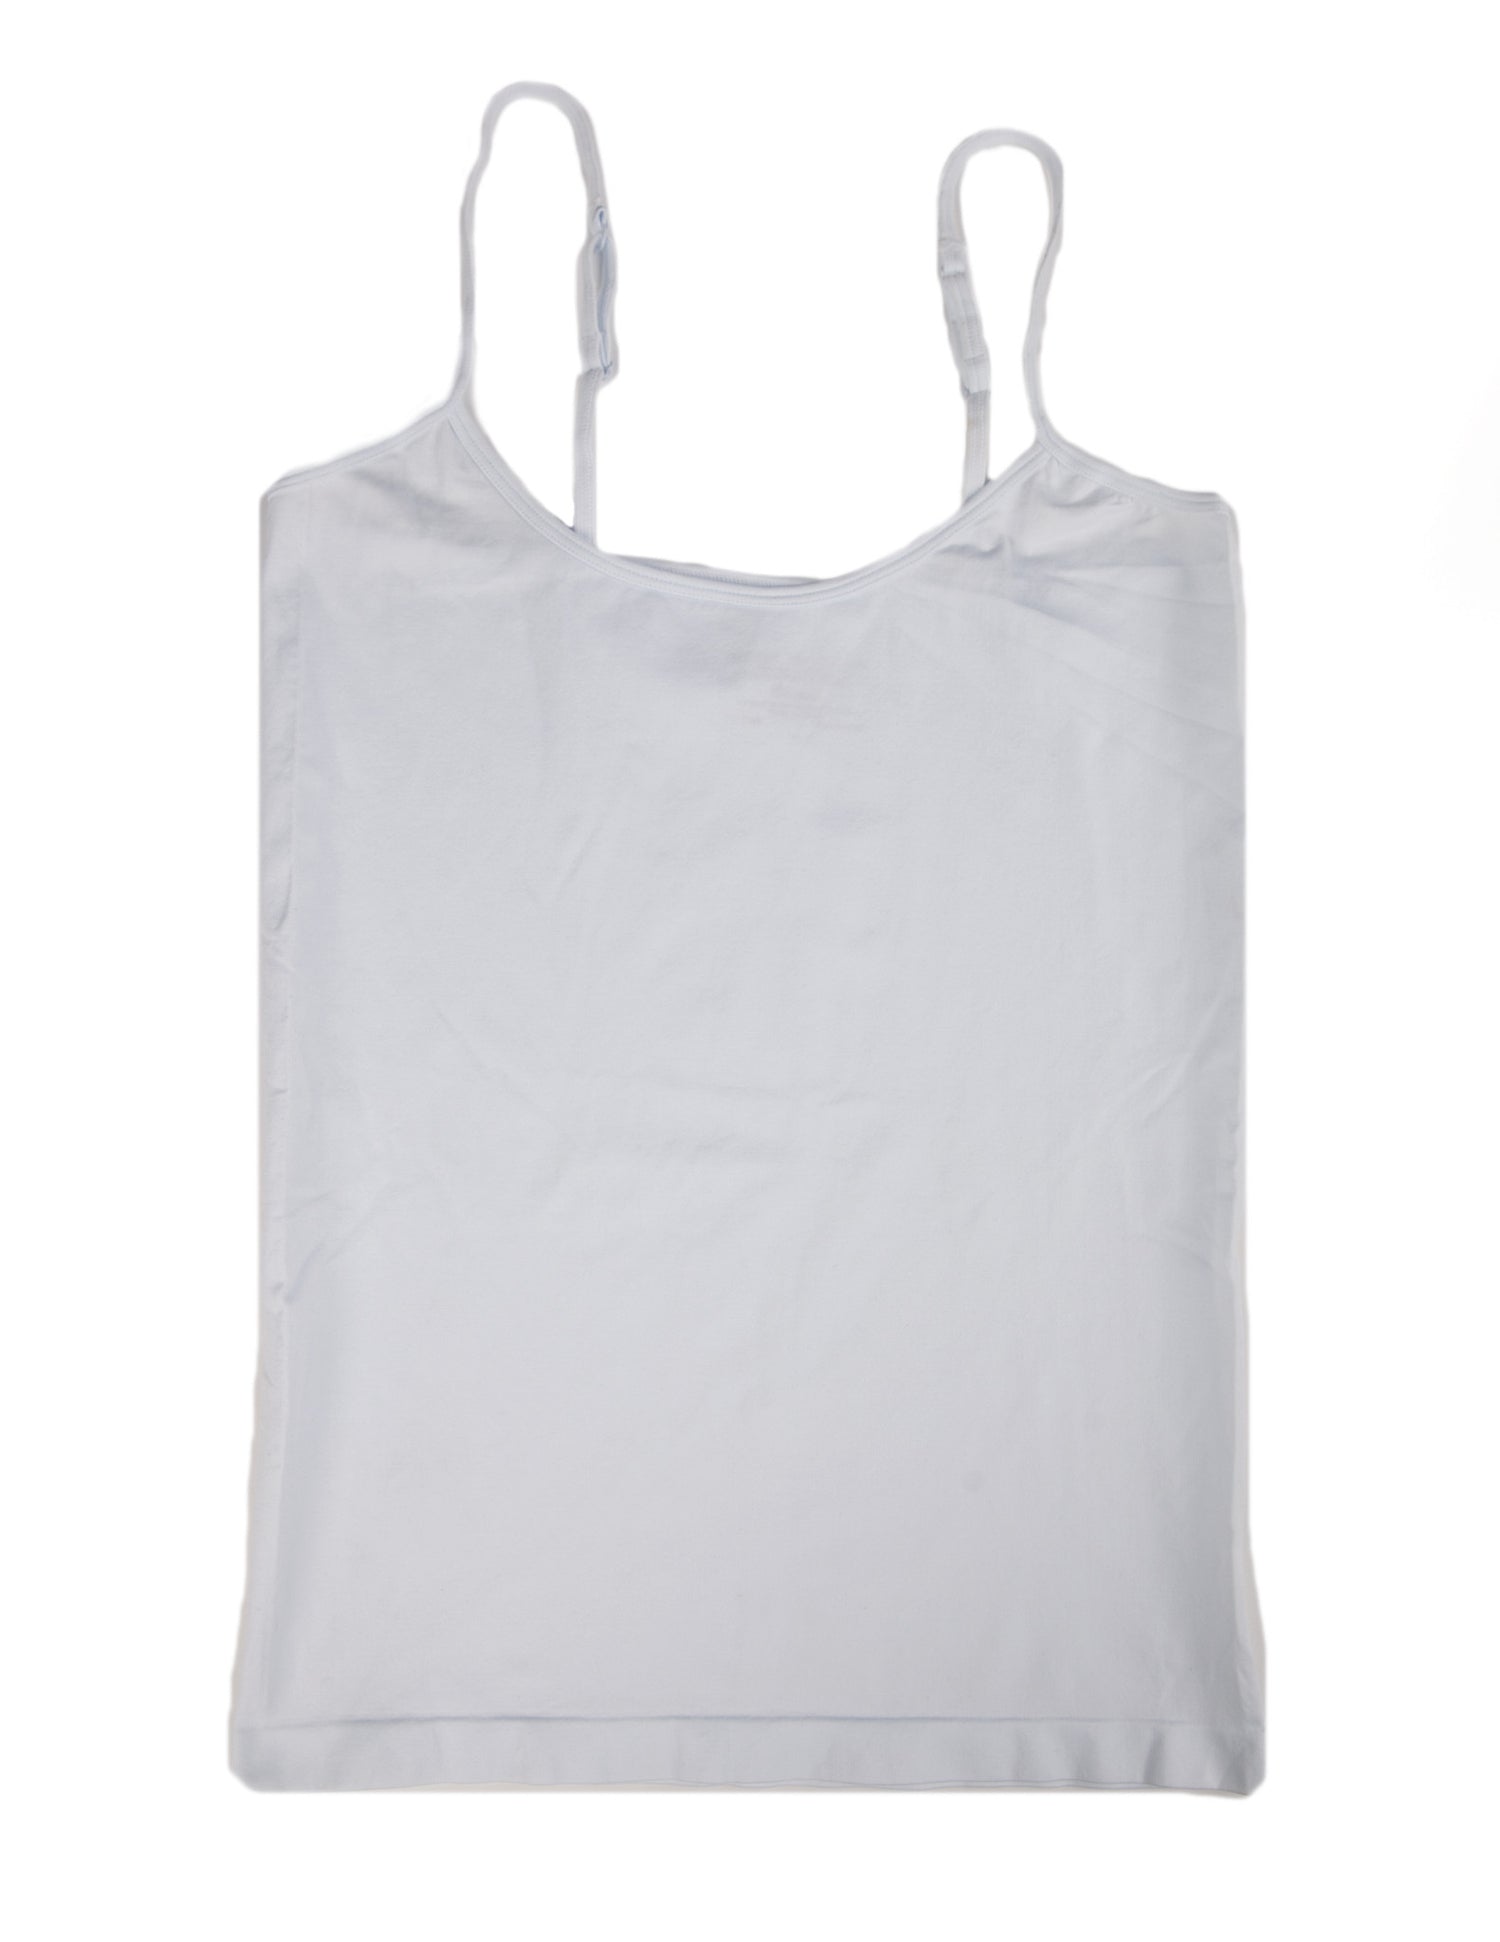 Pact Camisole